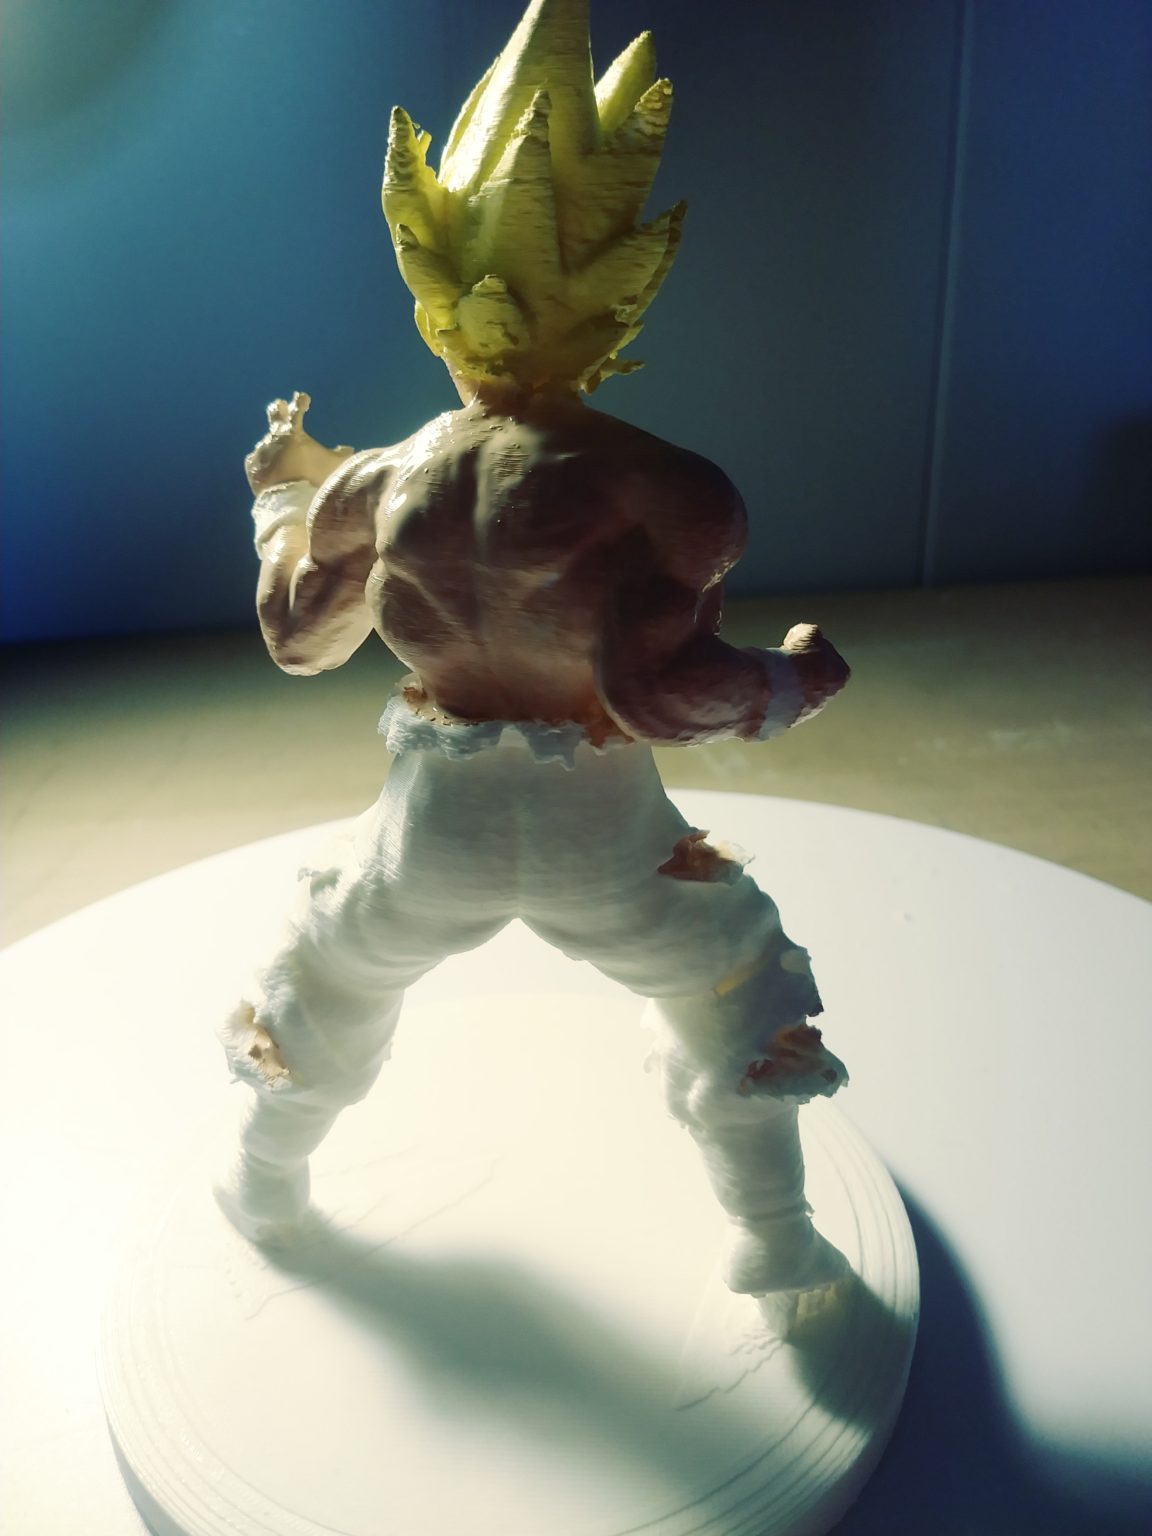 3D Print Your Own Anime Figures - Japan Powered